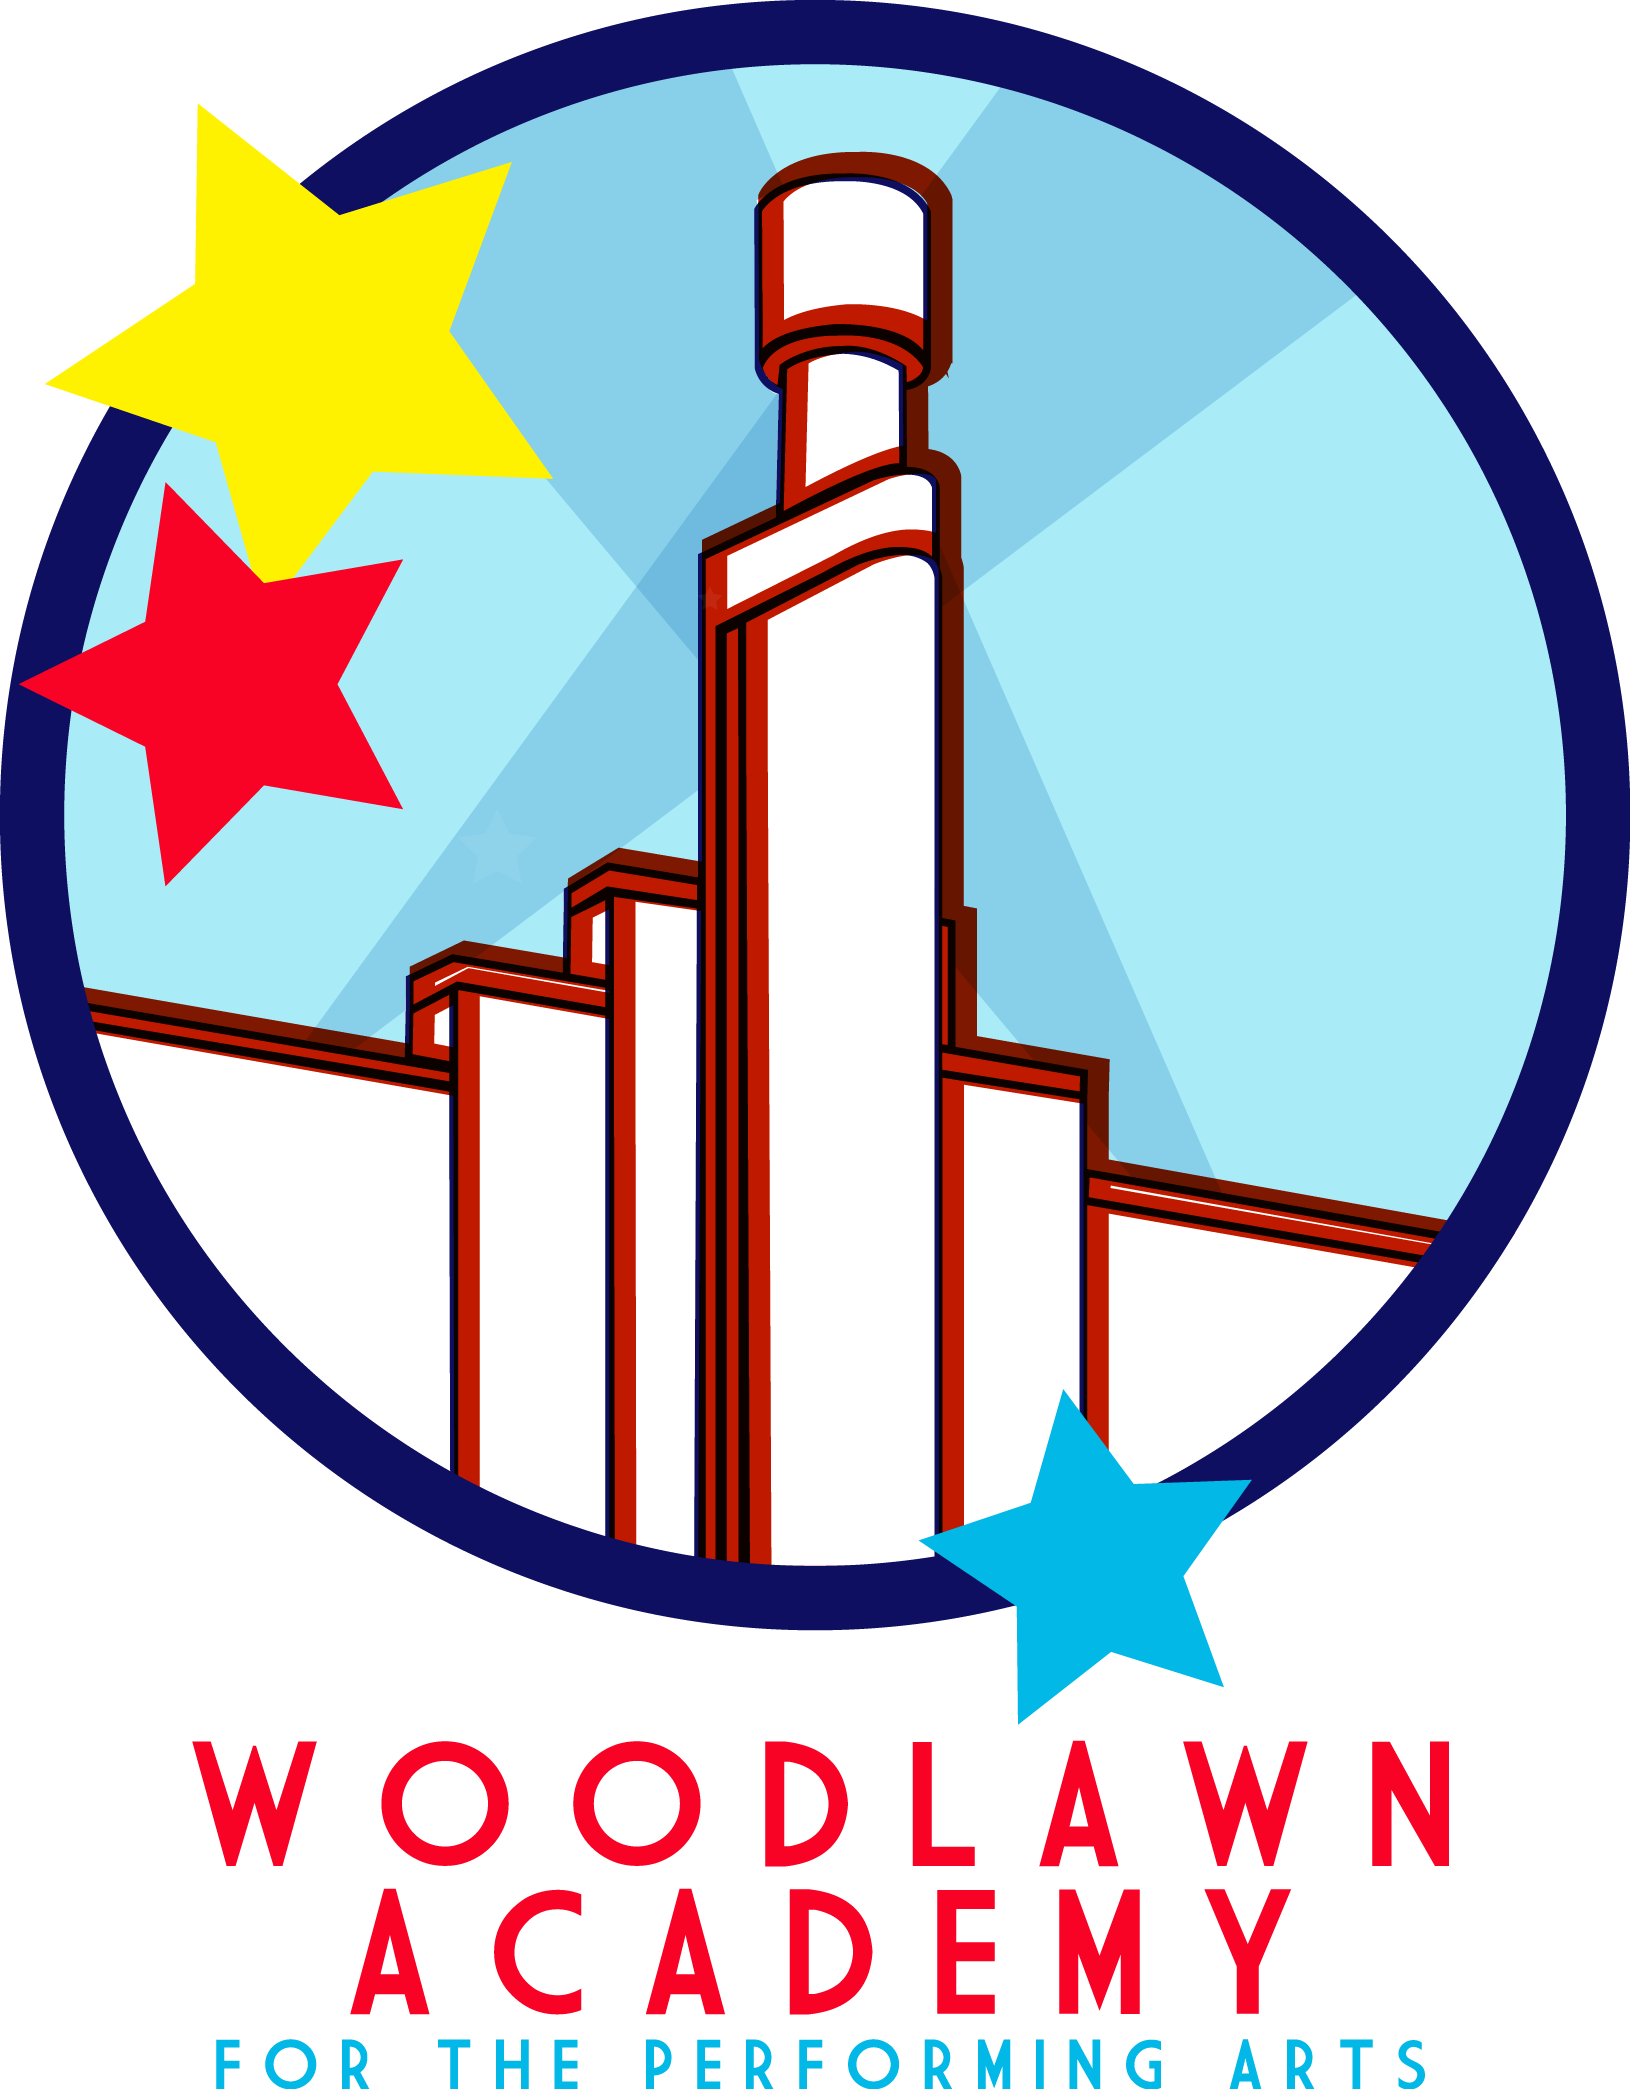 The academy woodlawn for. Volunteering clipart theatre